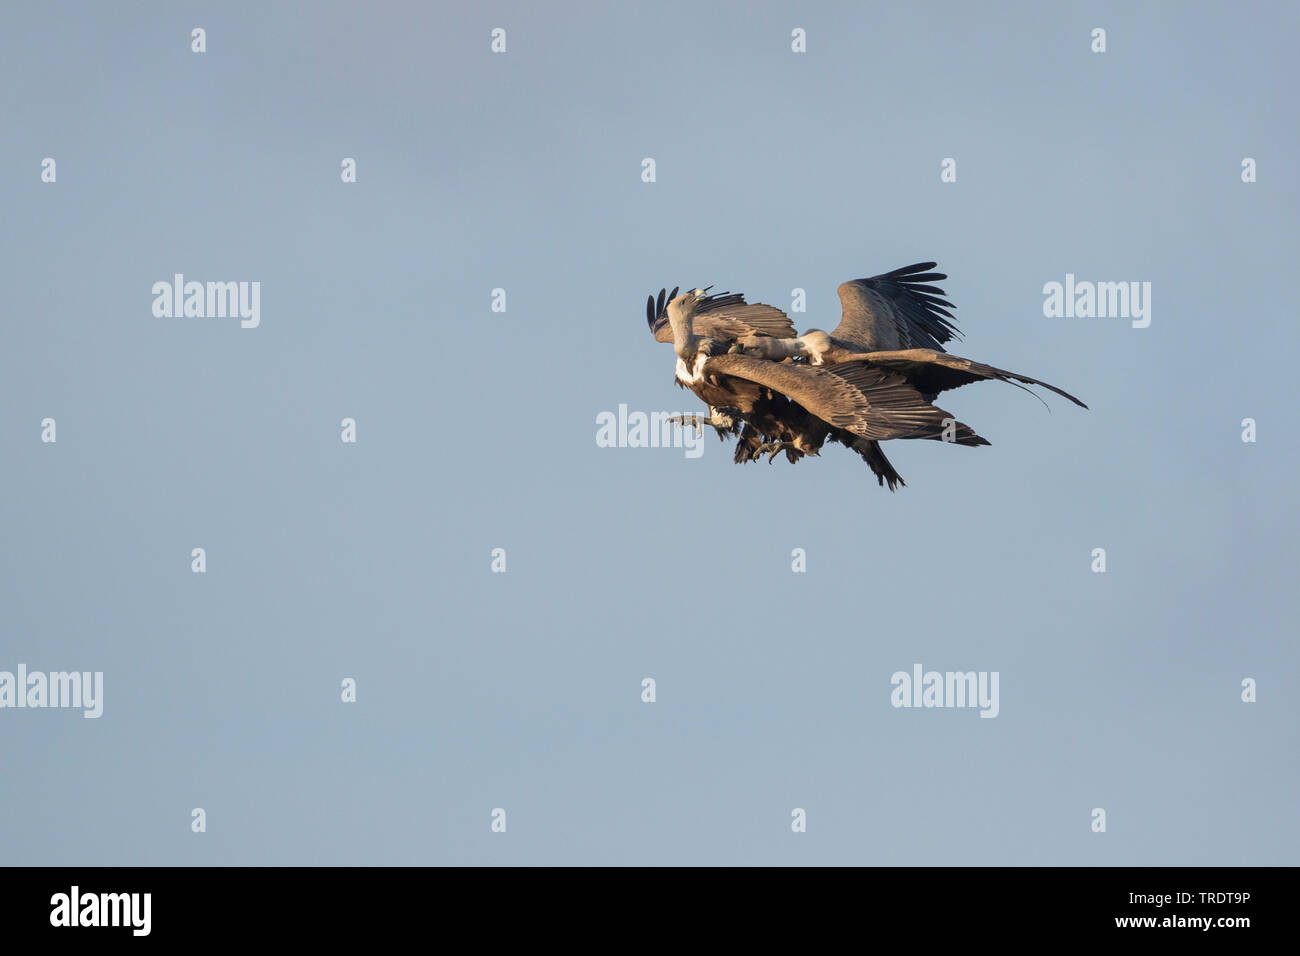 griffon vulture (Gyps fulvus), two vultures fighting in flight, Spain Stock Photo